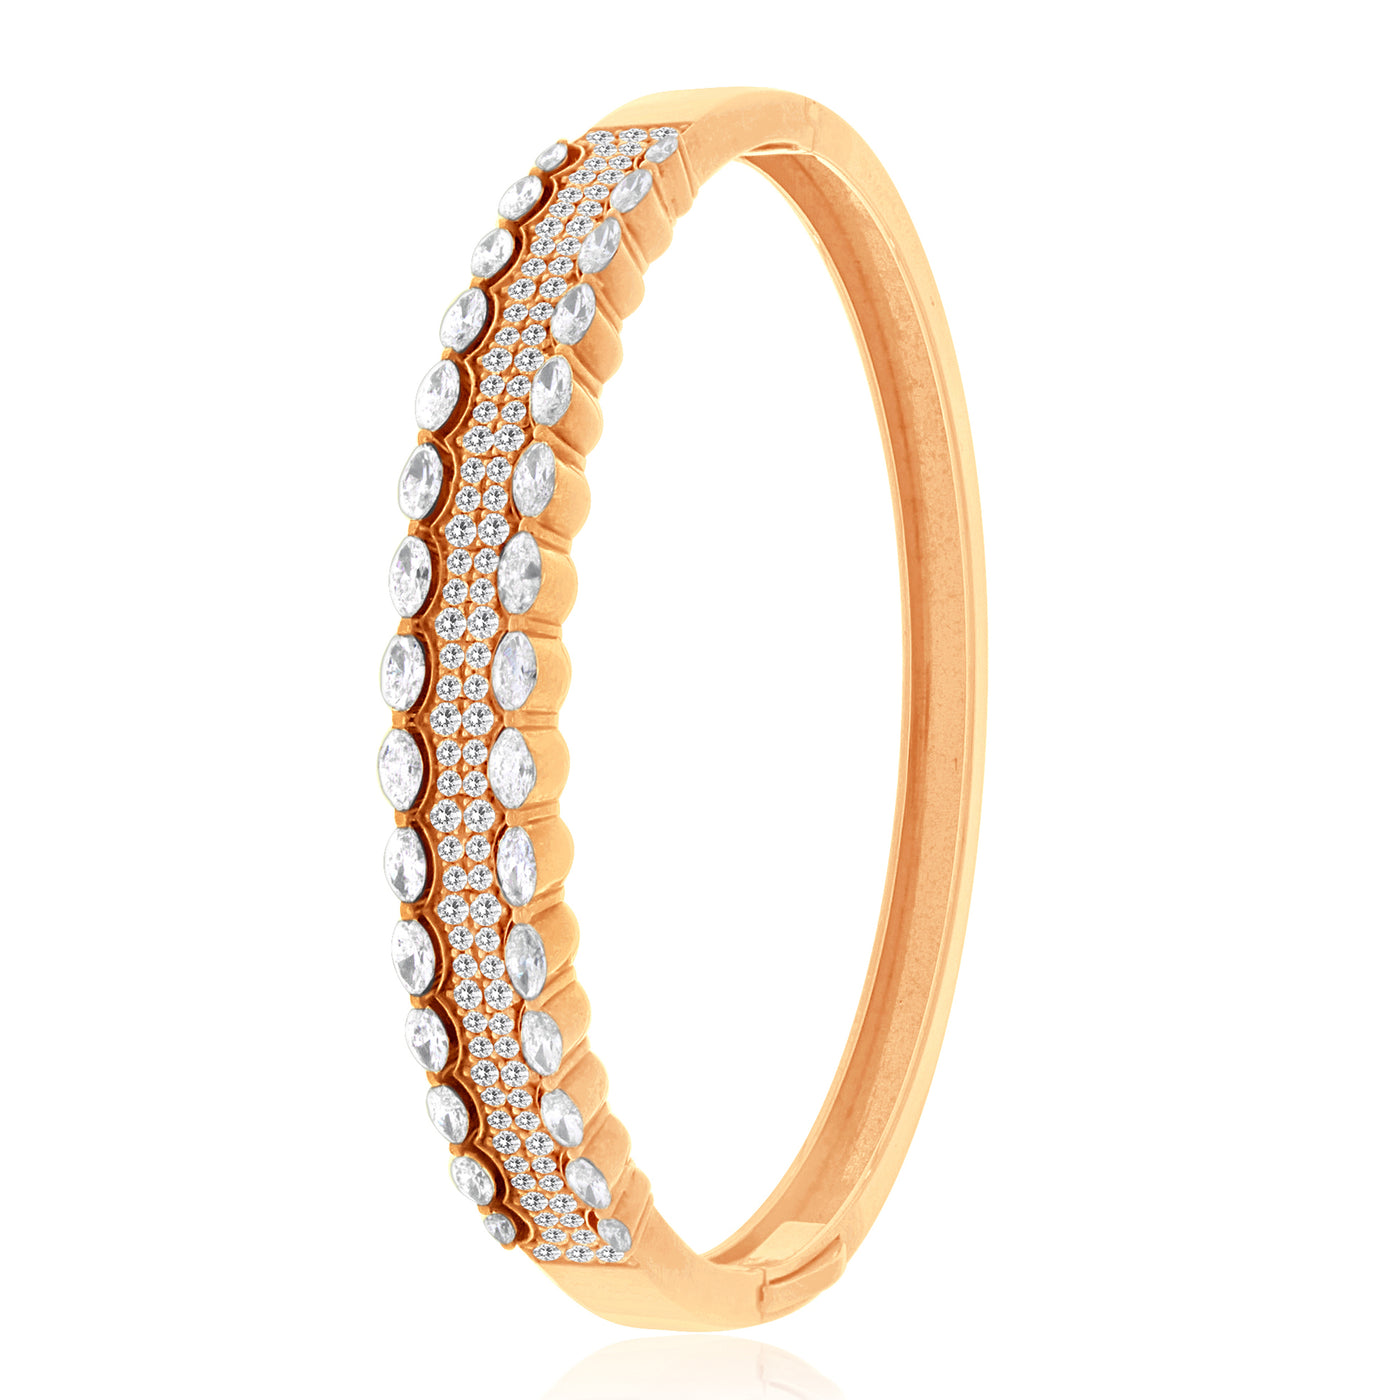 ETOILE Rose Gold Diamond Bangle With 2 line of marquise and Round Diamonds